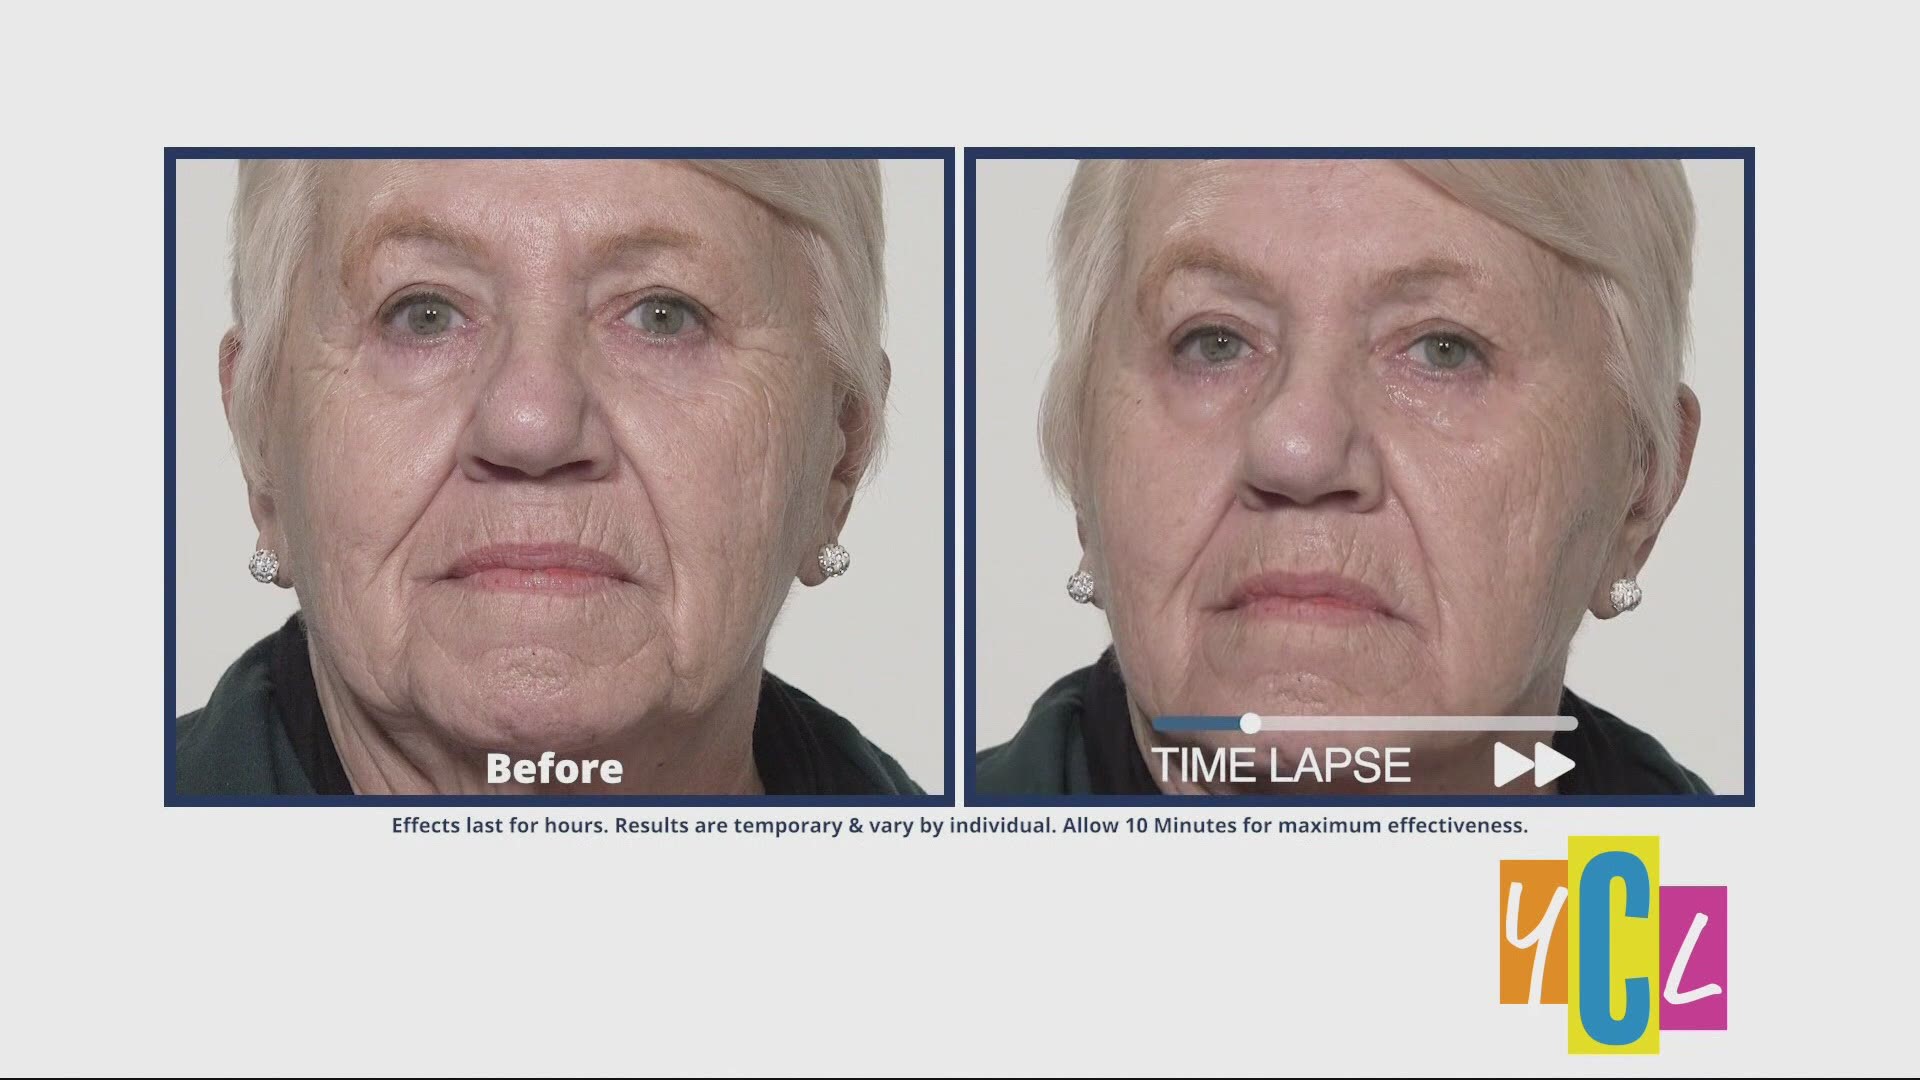 Reduce under eye bags, dark circles, and wrinkles from view using Plexaderm. This segment was paid for by True Earth Health Solutions.